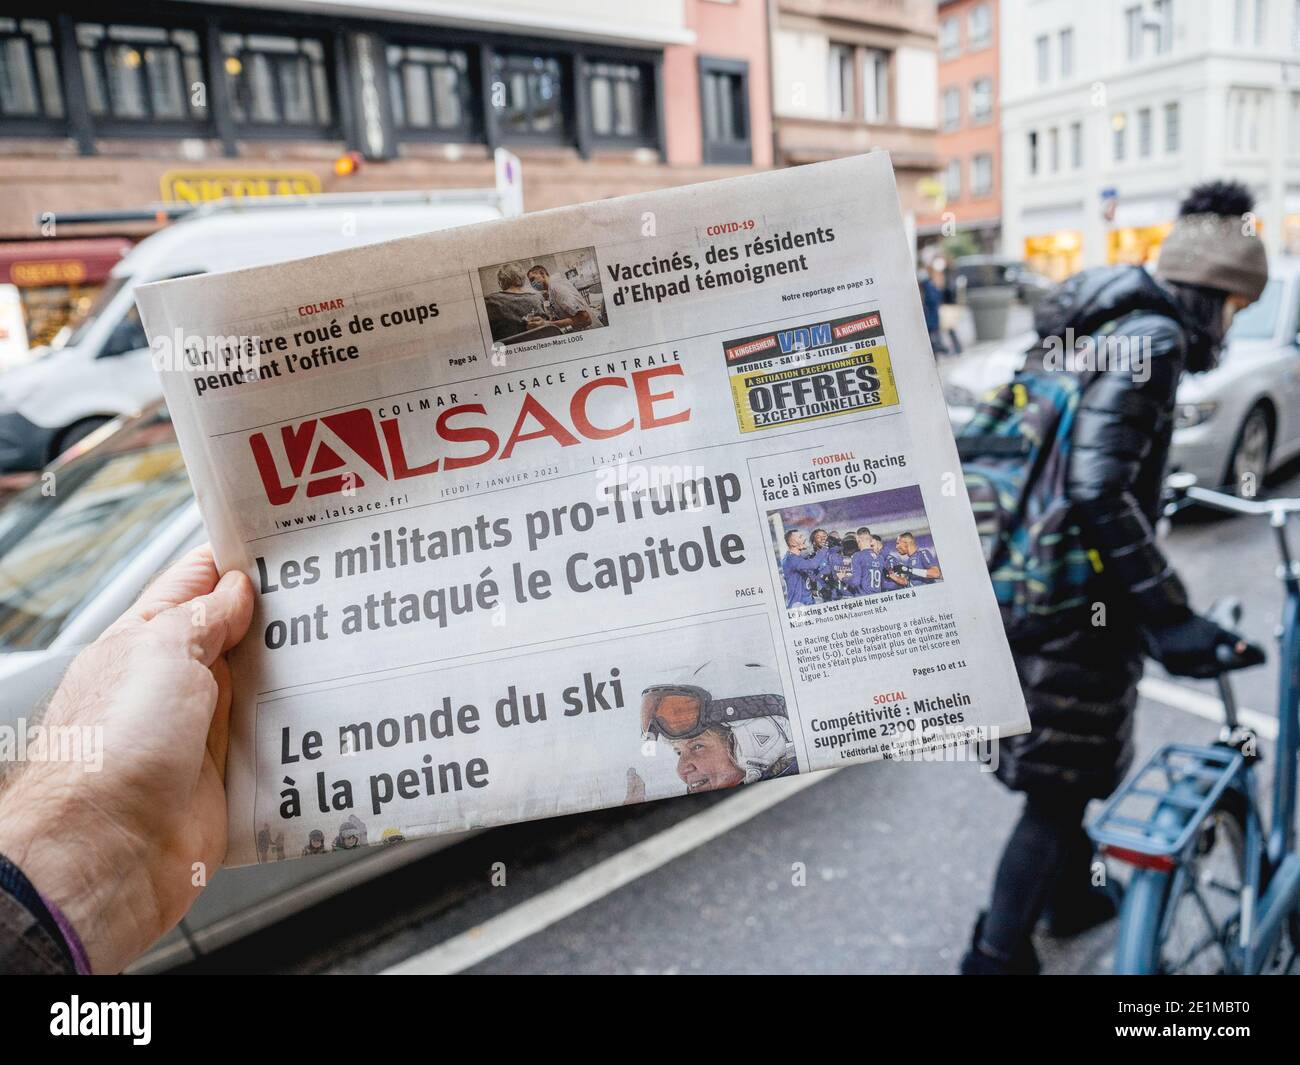 Paris, France - Jan 7, 2020: French newspaper L'Alsace front page headline show storming of the U.S. Capitol by supporters of U.S. President Donald Tr Stock Photo